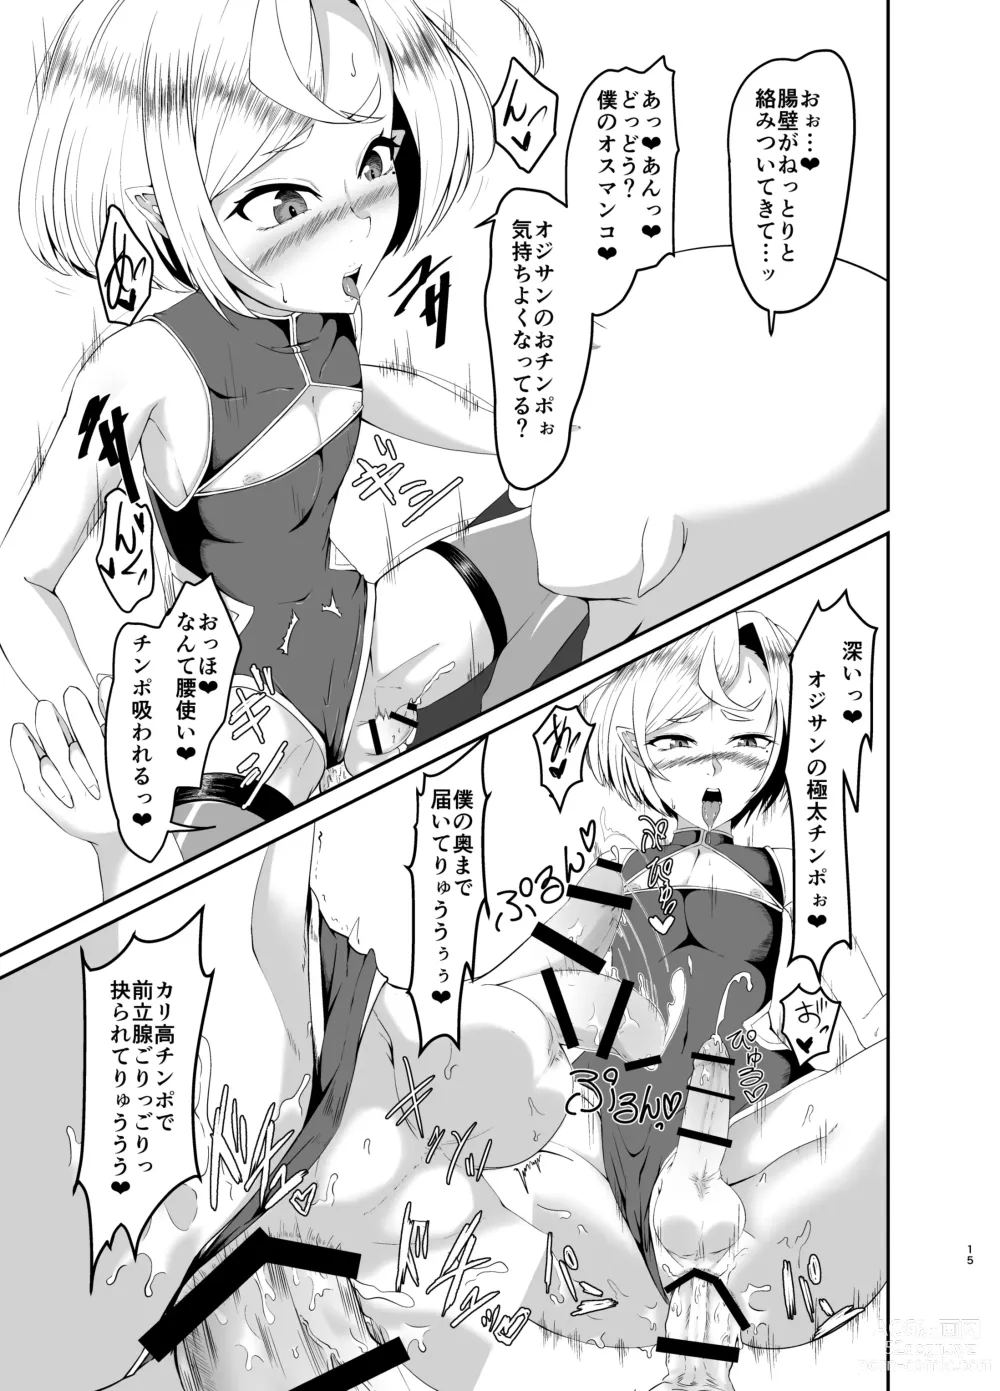 Page 5 of doujinshi XXX Company of Male Daughters